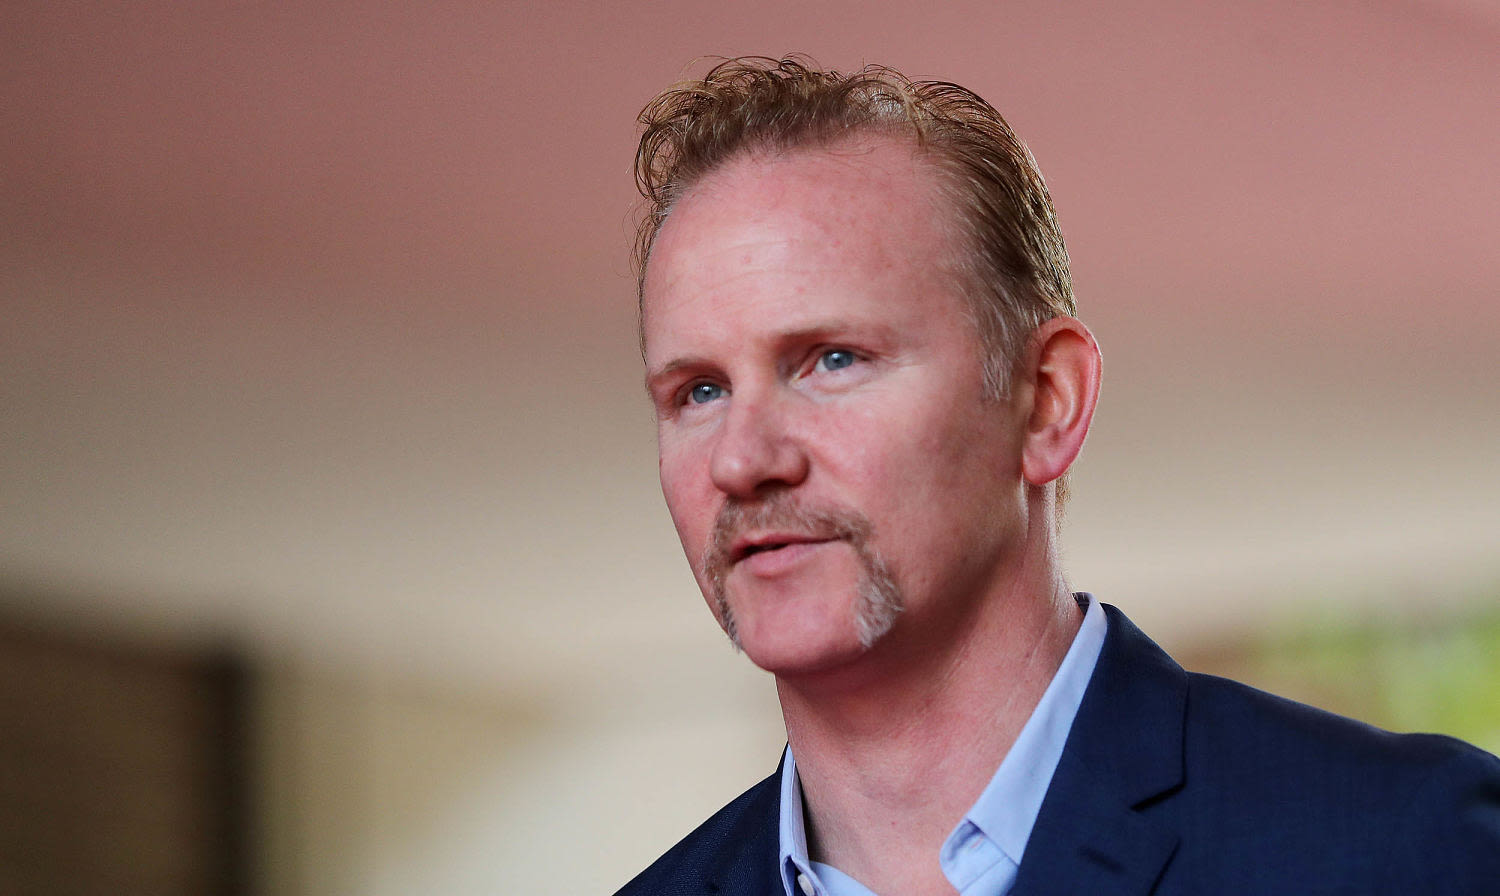 Morgan Spurlock, 'Super Size Me' director and star, has died at 53